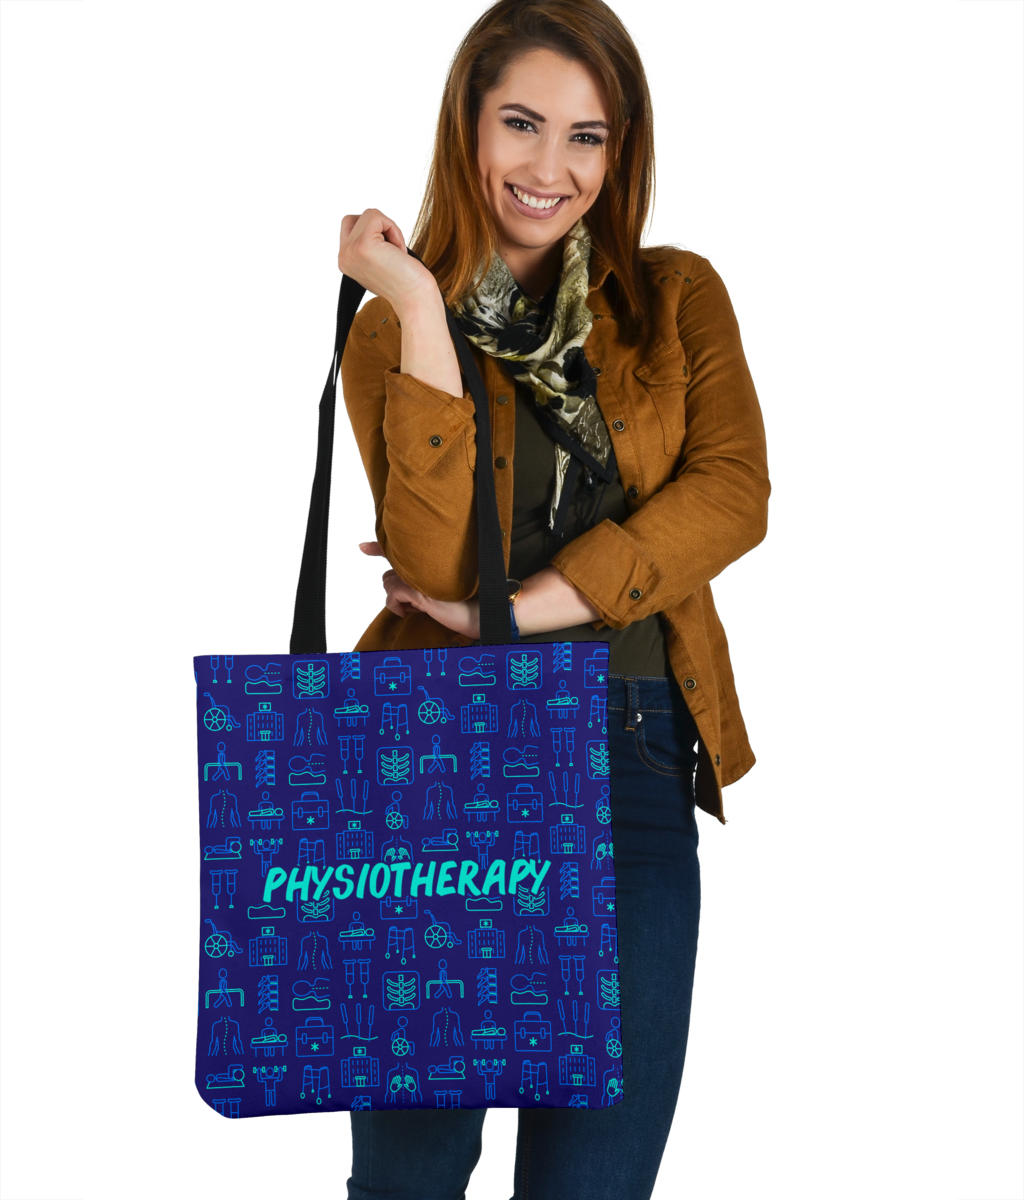 Physiotherapy Pattern Cloth Tote Bag